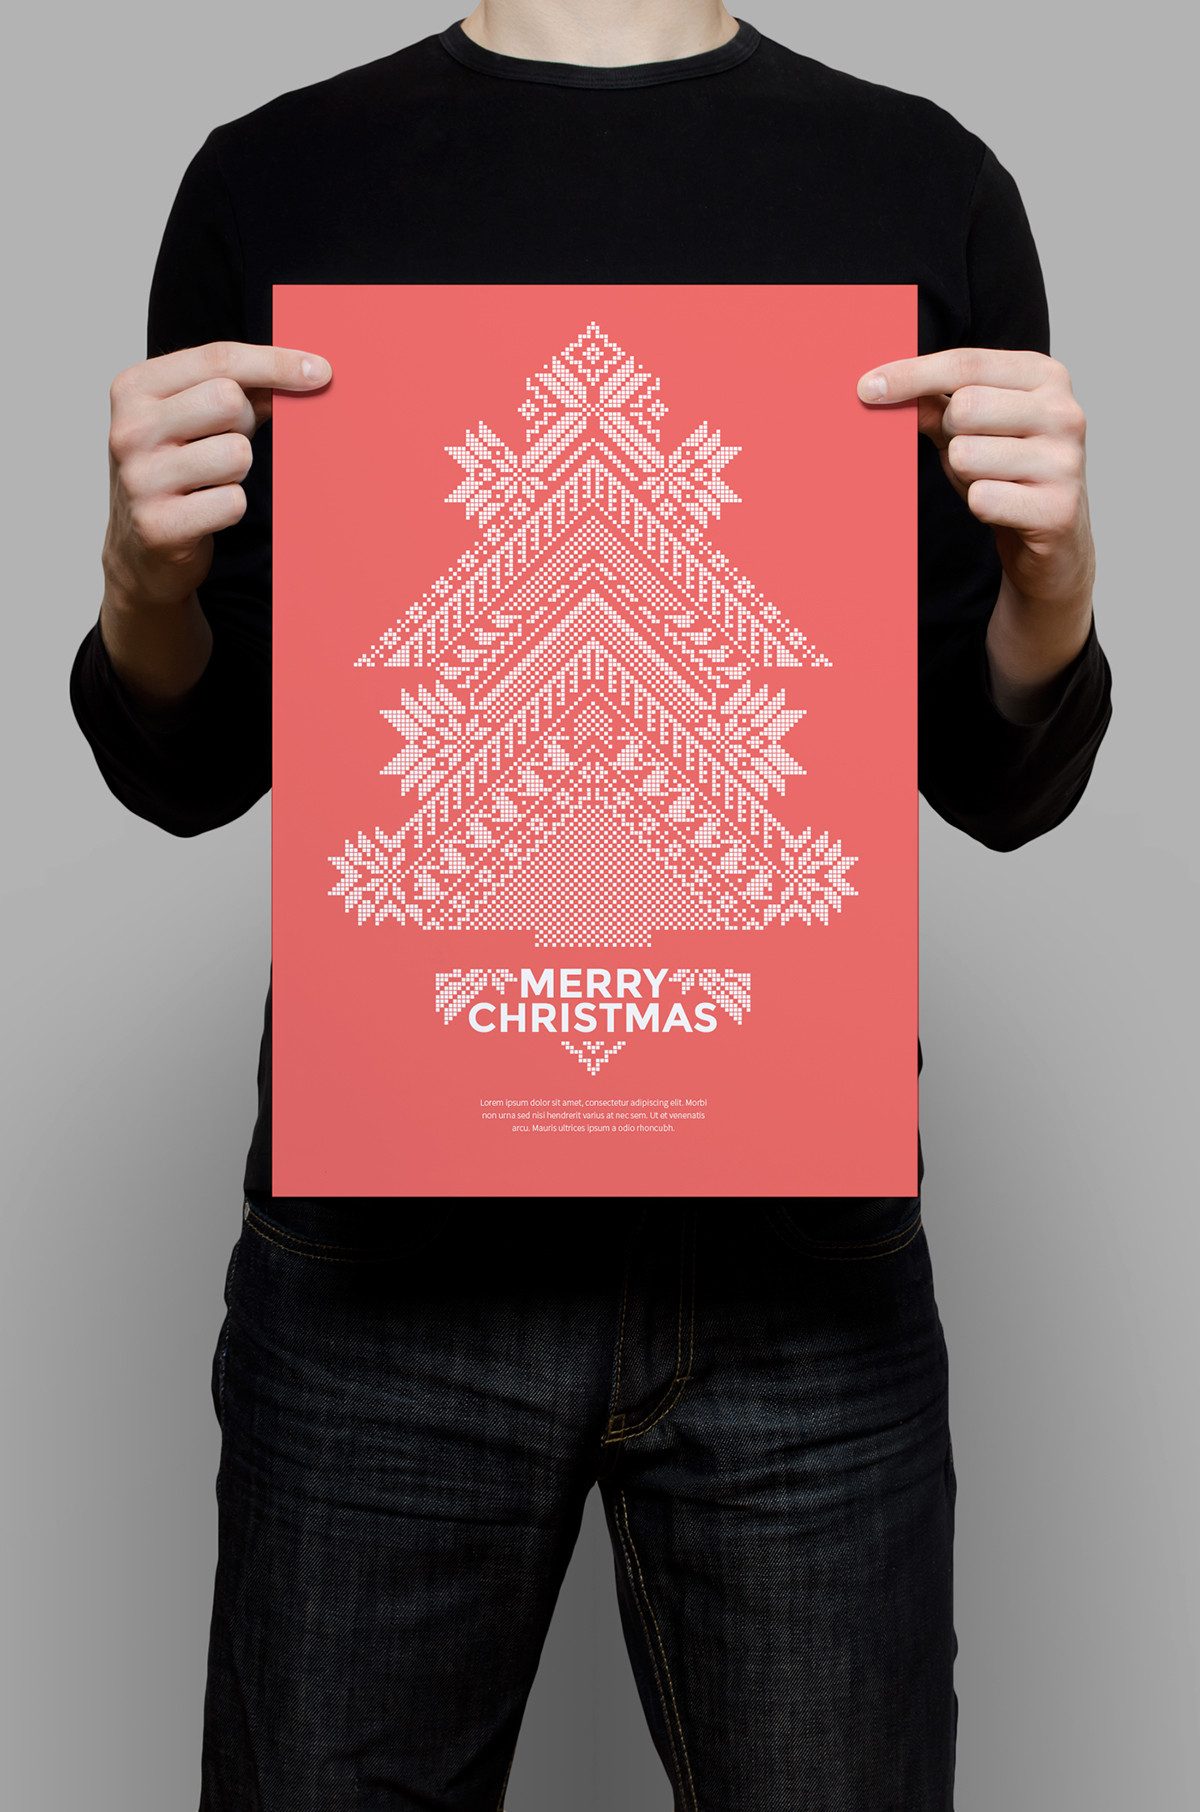 poster flyer Christmas xmas holidays red